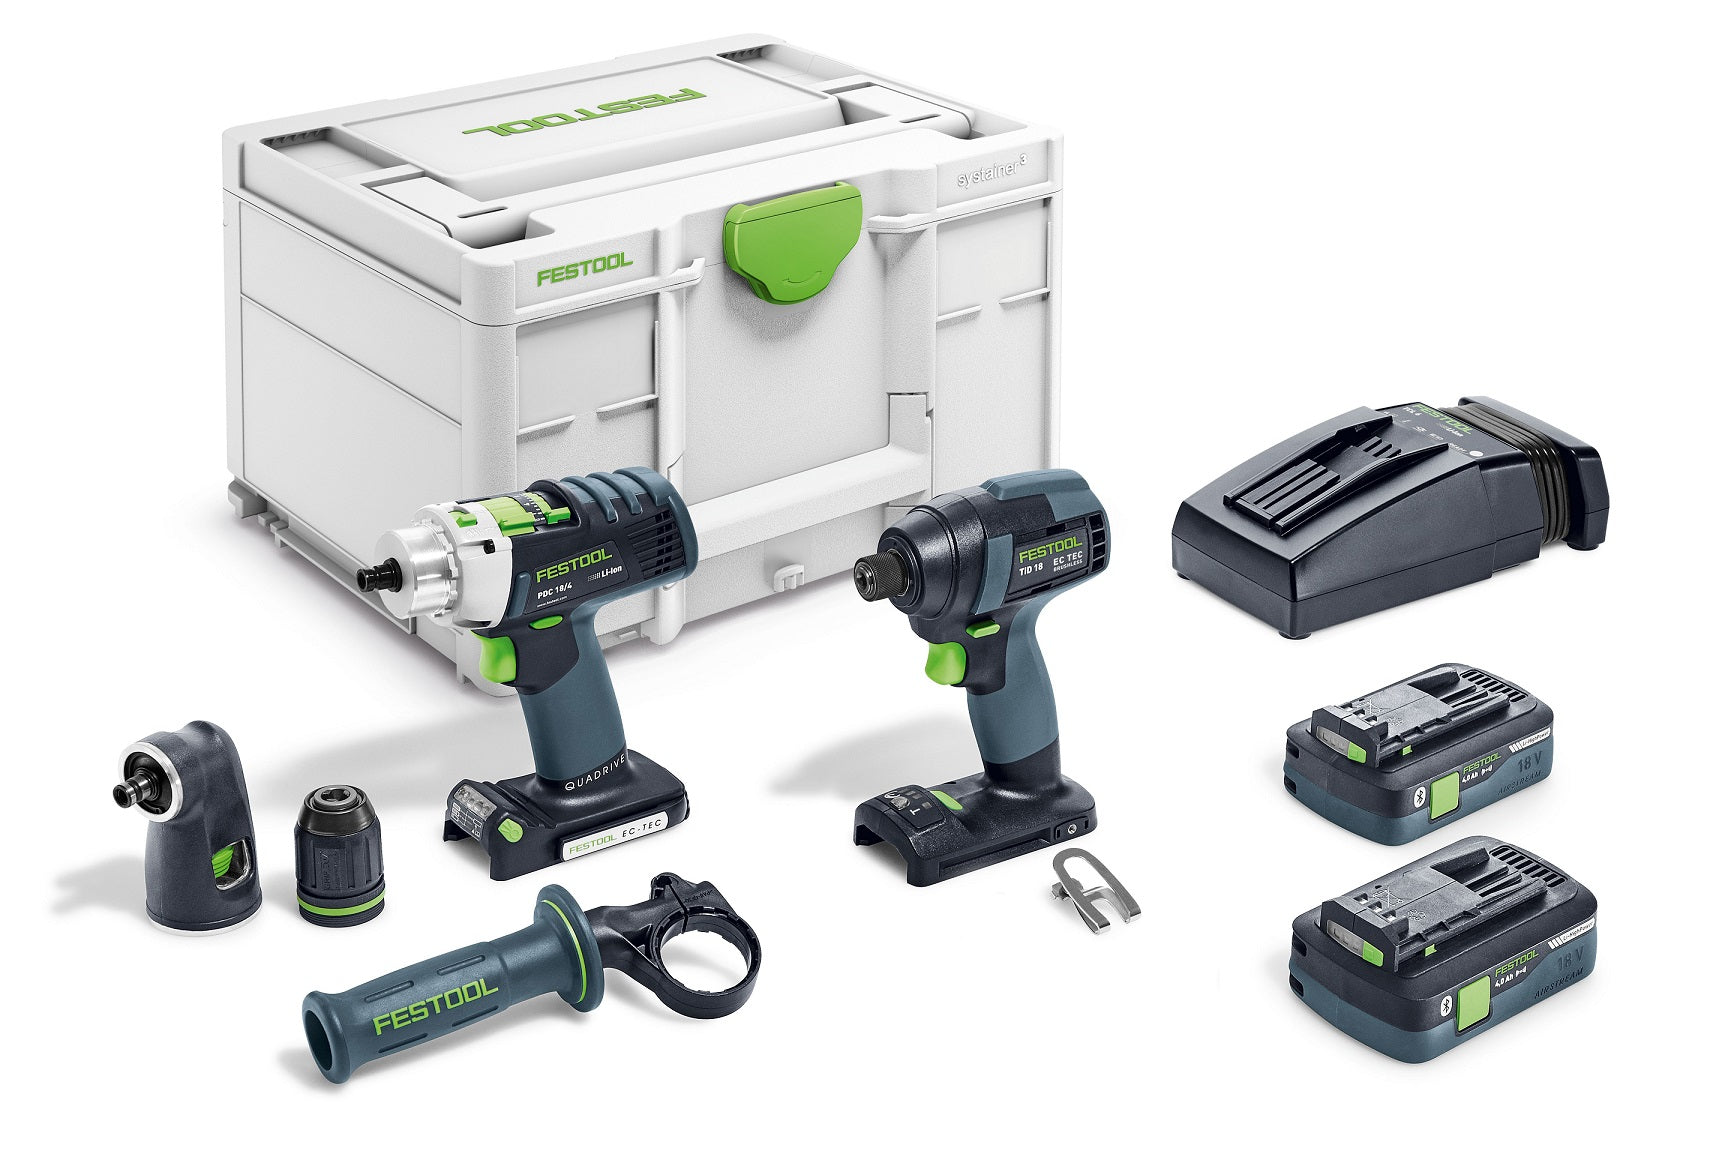 Festool 576490 TID 18 Impact Driver and PDC 18 Drill Driver Combo Kit